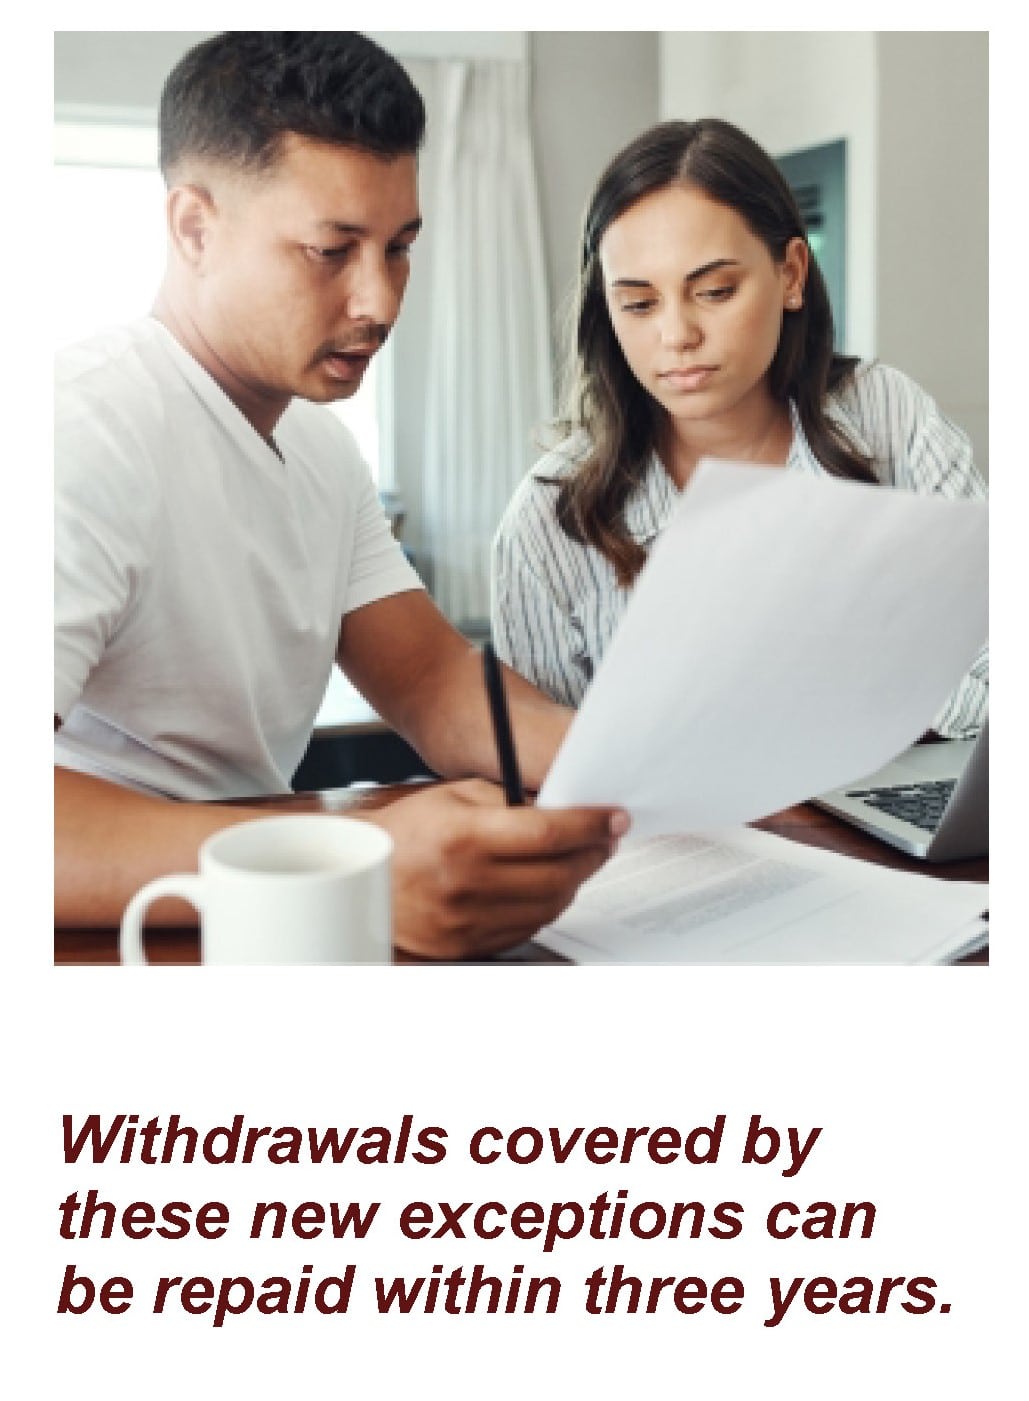 Man and woman looking at a document. The caption under them says: " Withdrawals covered by these new exceptions can be repaid with in three years."